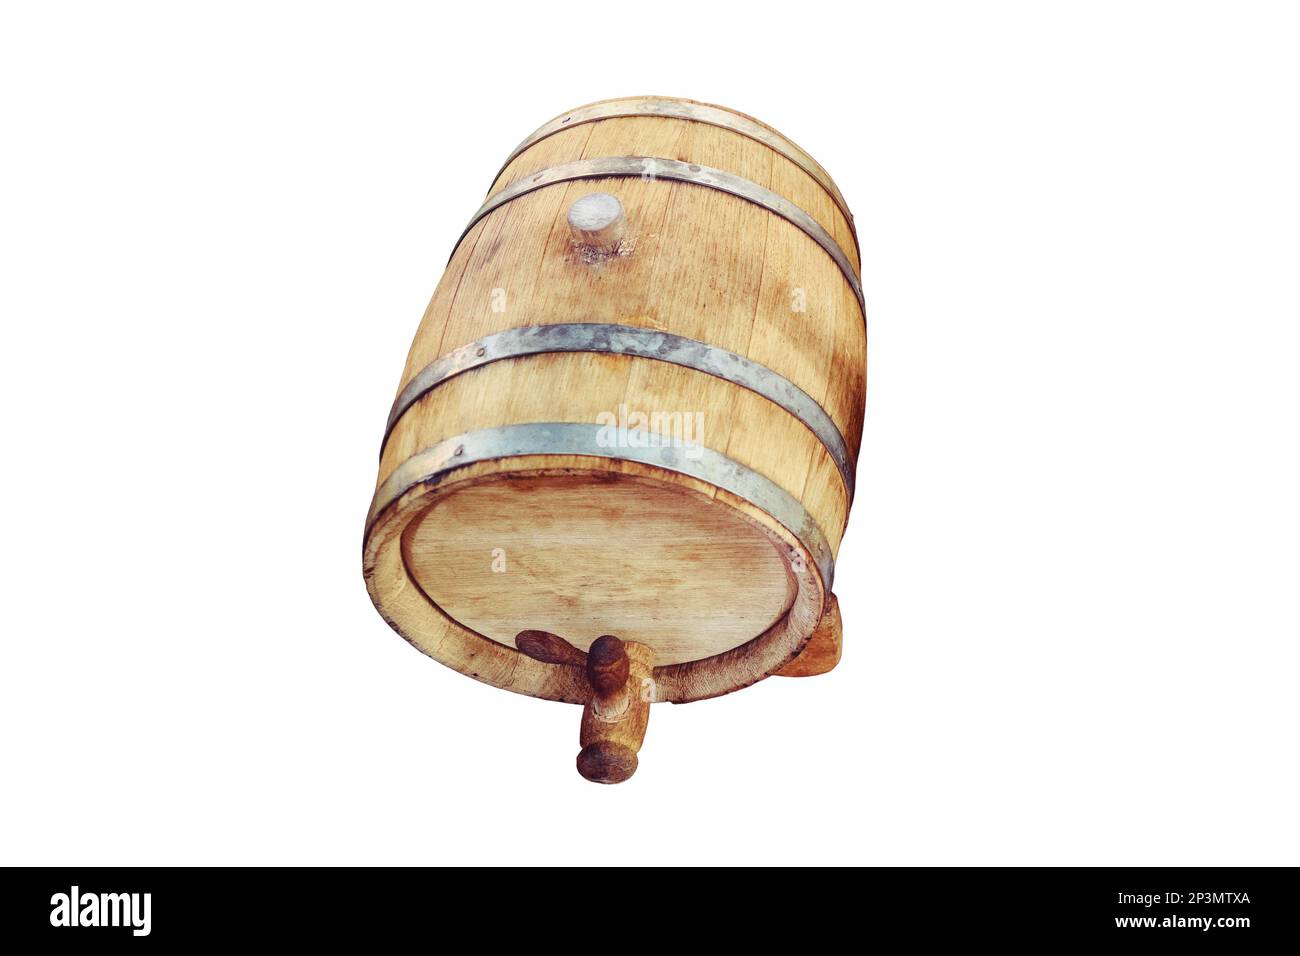 Wooden barrel, flowers and wine bottles with a retro style, isolated on a white background. American wine of the conquest of the wild West Stock Photo